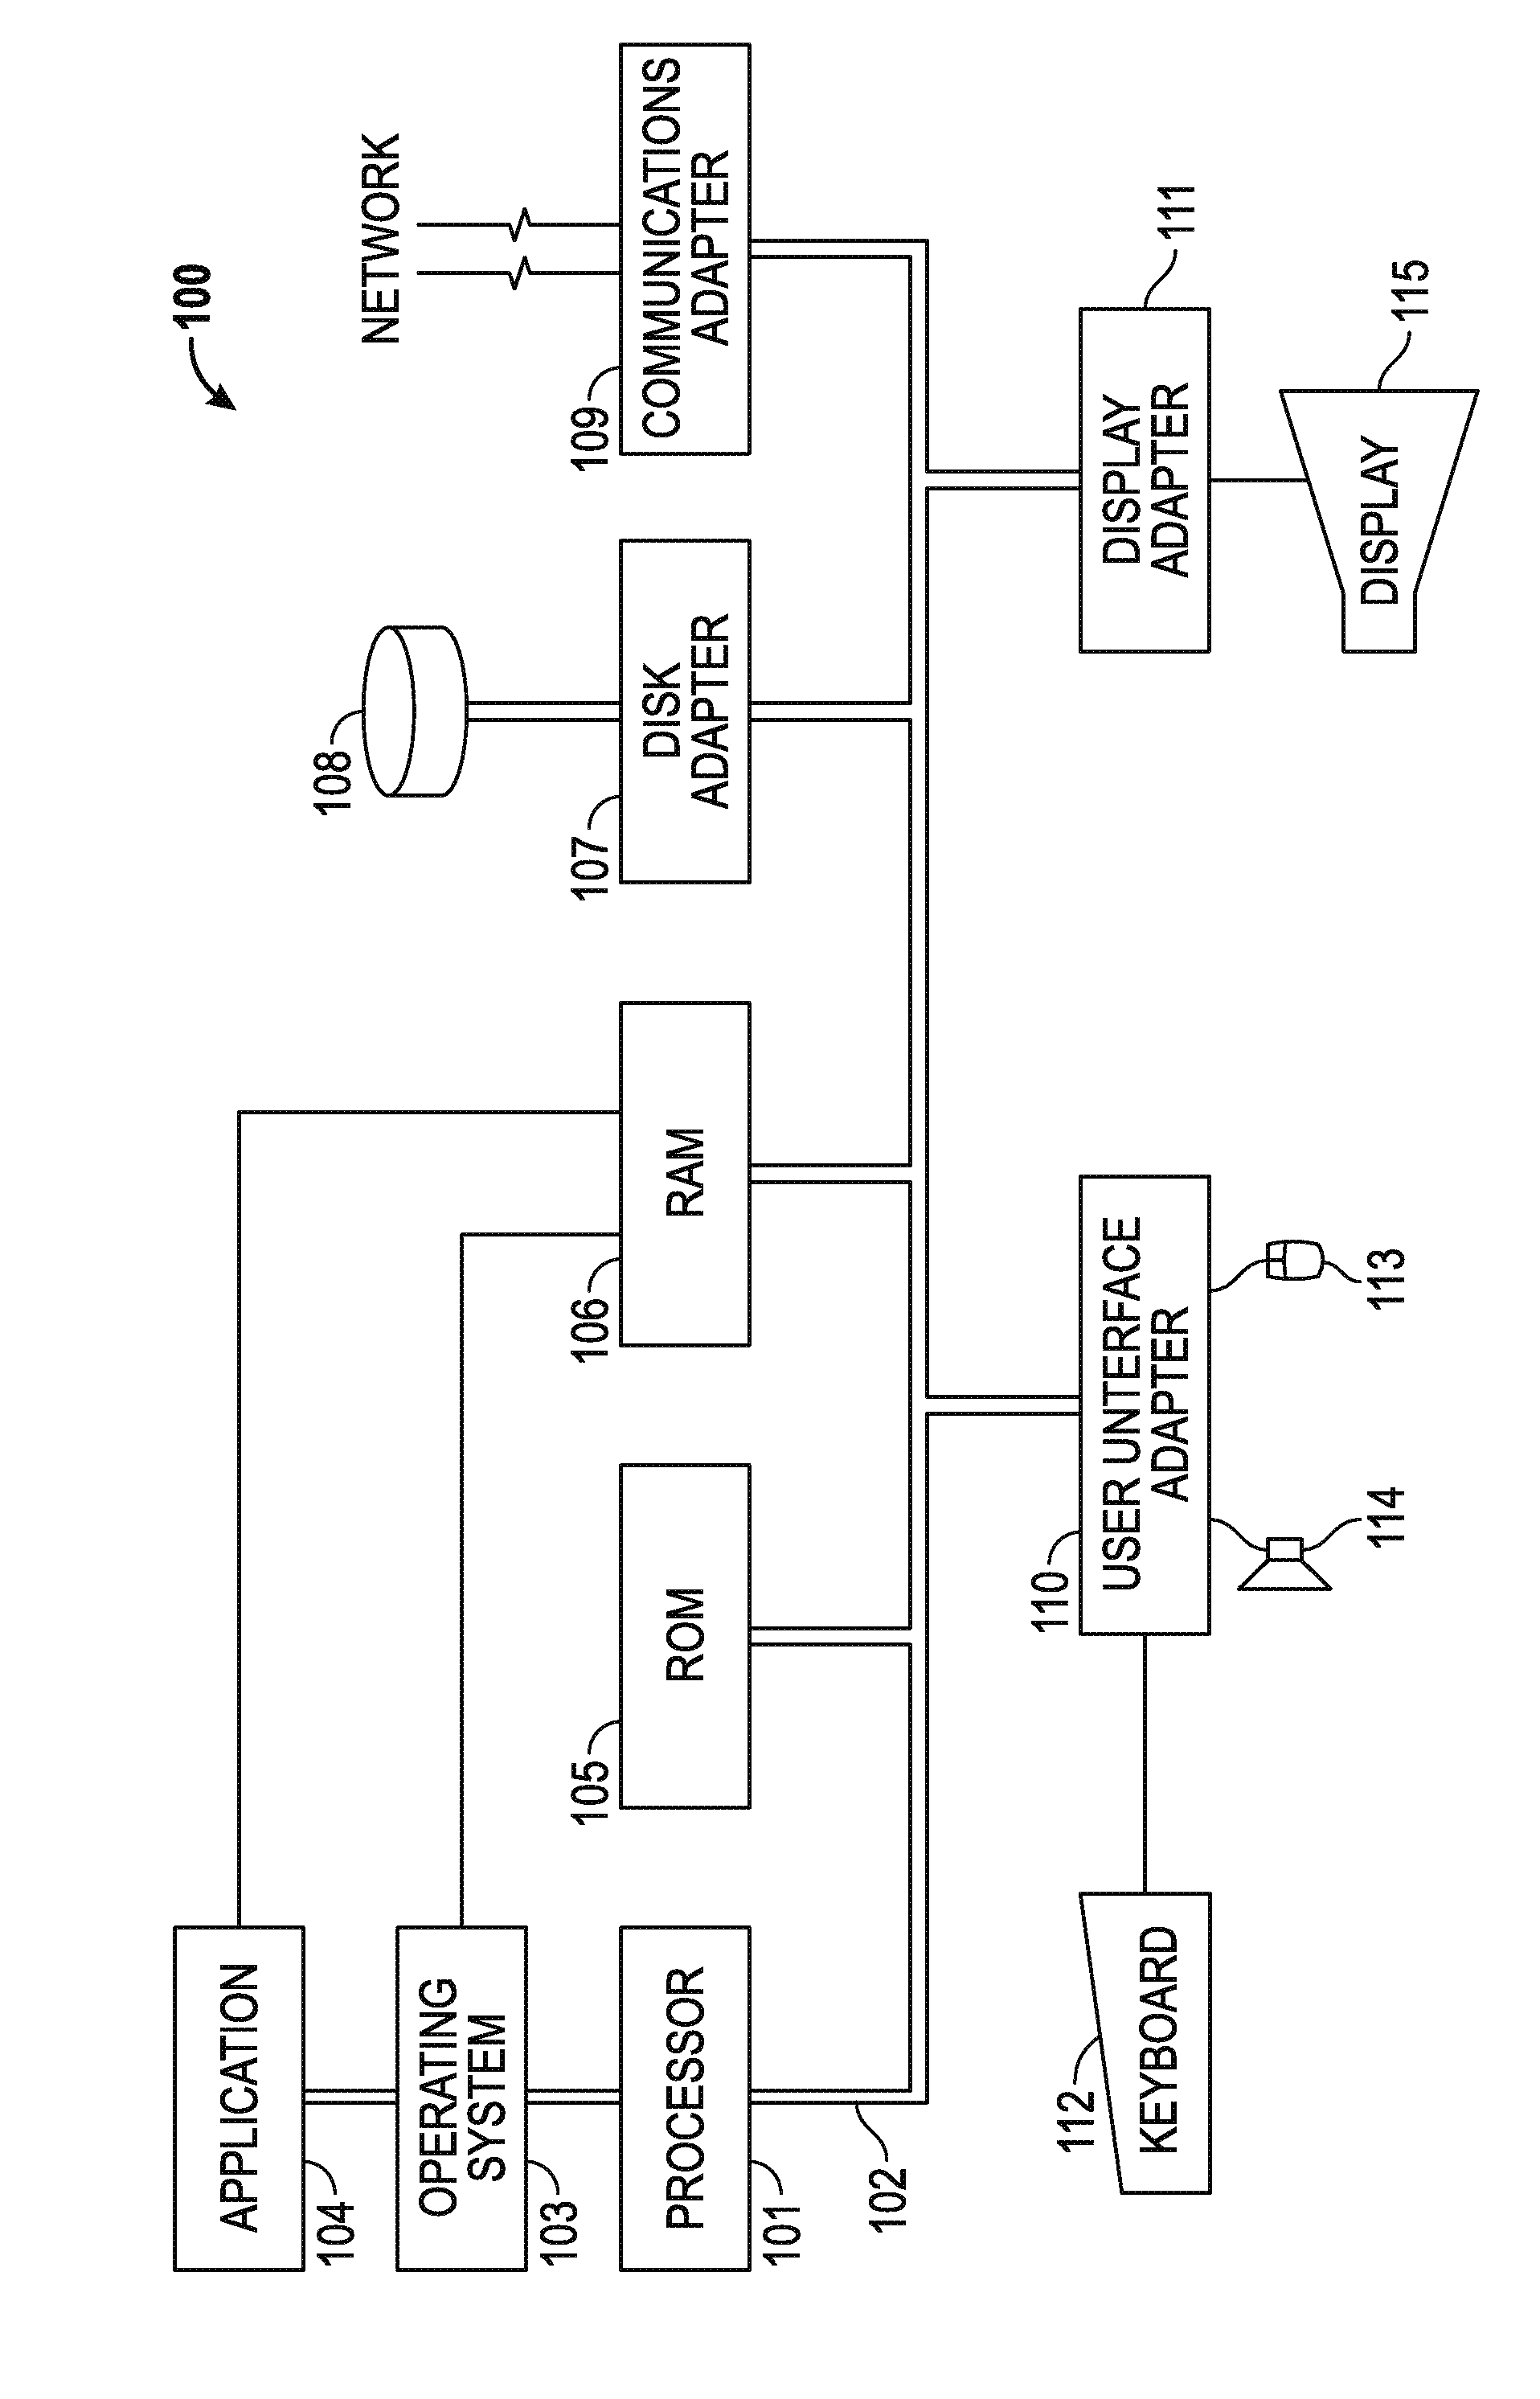 Methods for directed self-assembly process/proximity correction